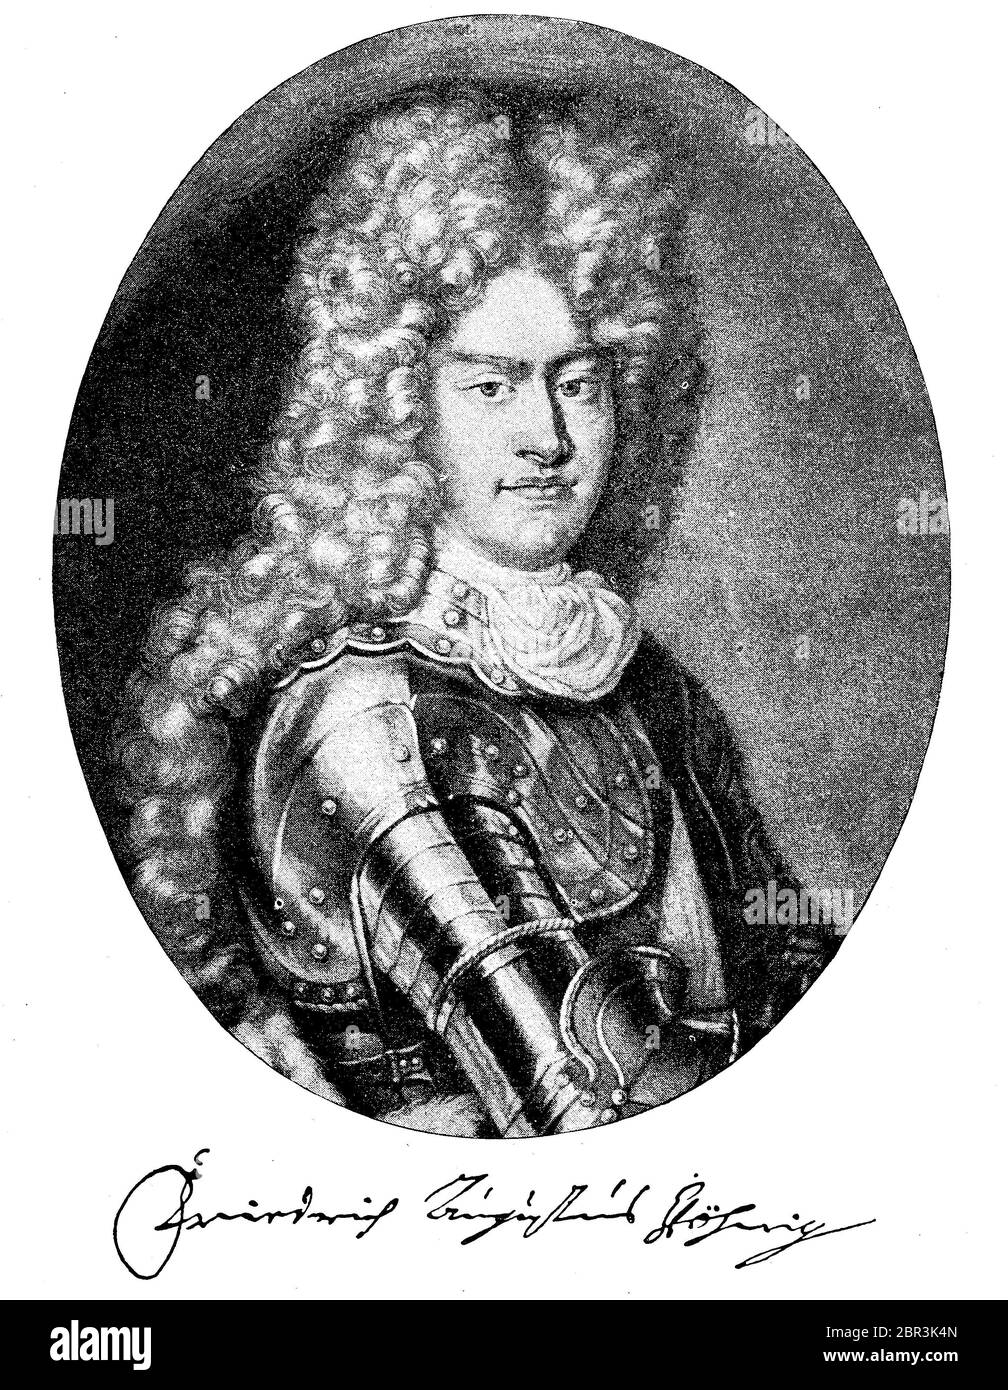 Frederick Augustus I of Saxony, called August the Strong, May 12, 1670 - February 1, 1733, from the Albertine line of the Wettin was from 1694 Elector and Duke of Saxony and from 1697 in personal union as Augustus II, King of Poland-Lithuania.  /  Friedrich August I. von Sachsen, genannt August der Starke, 12. Mai 1670 - 1. Februar 1733, aus der albertinischen Linie der Wettiner war ab 1694 Kurfürst und Herzog von Sachsen sowie ab 1697 in Personalunion als August II. König von Polen-Litauen, Historisch, historical, digital improved reproduction of an original from the 19th century / digitale R Stock Photo